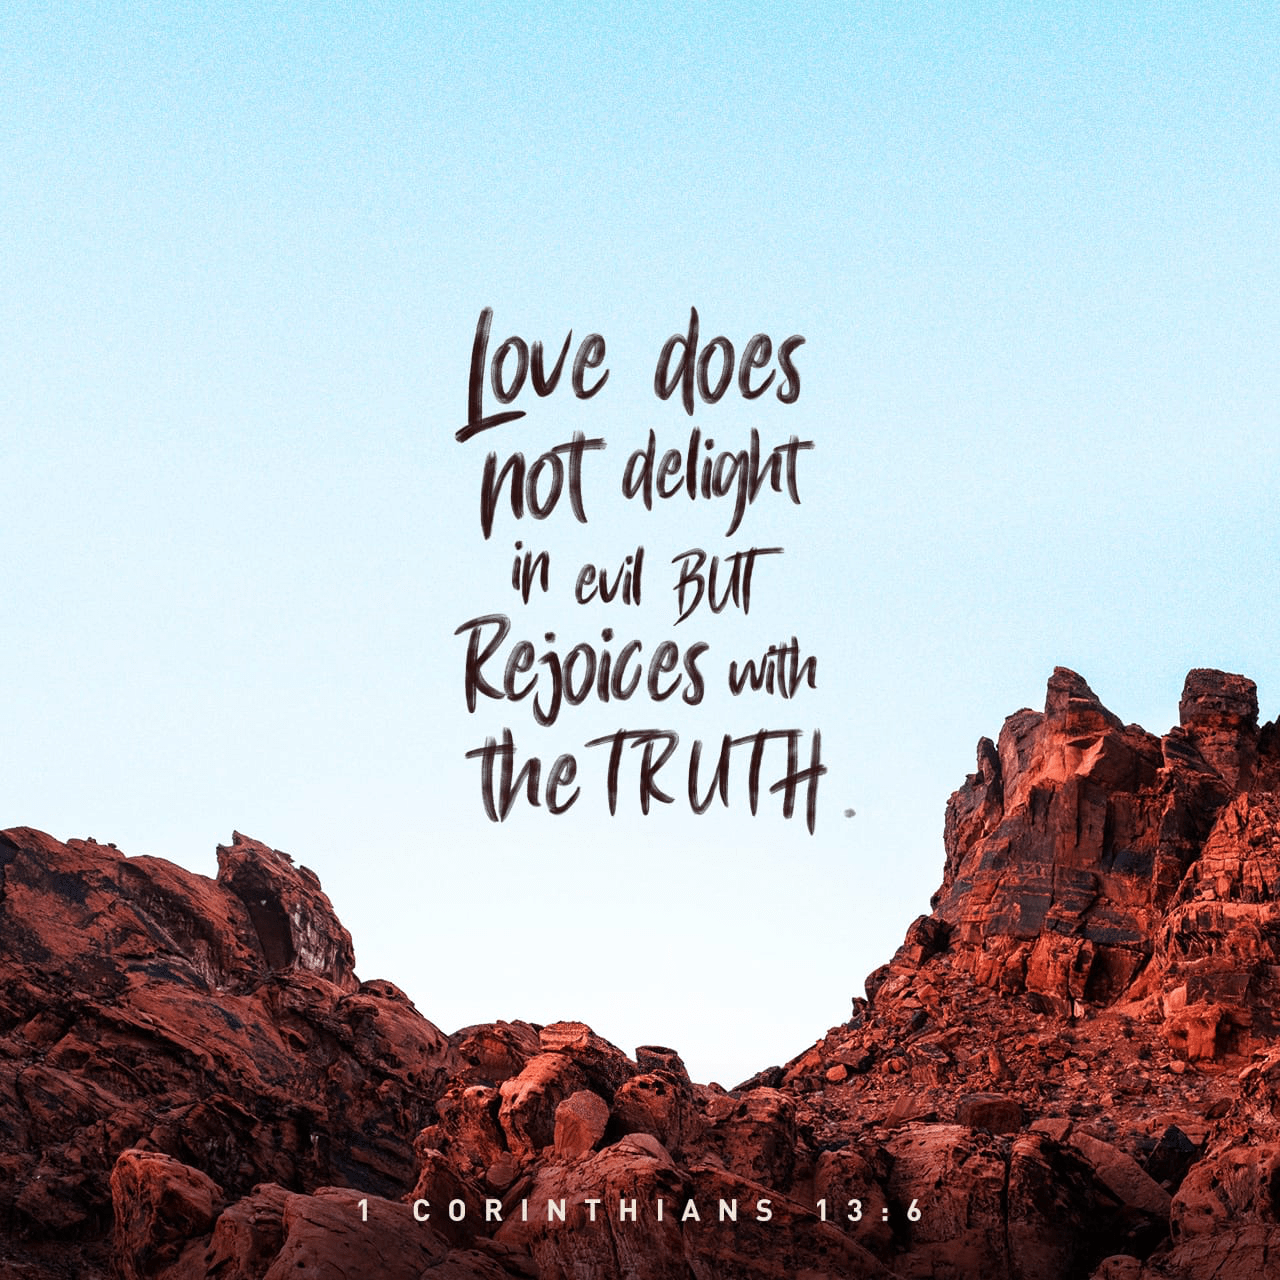 VOTD May 15 - “Love does not rejoice in unrighteousness, but rejoices with the truth;” ‭‭1 Corinthians‬ ‭13:6‬ ‭NASB‬‬ #Love